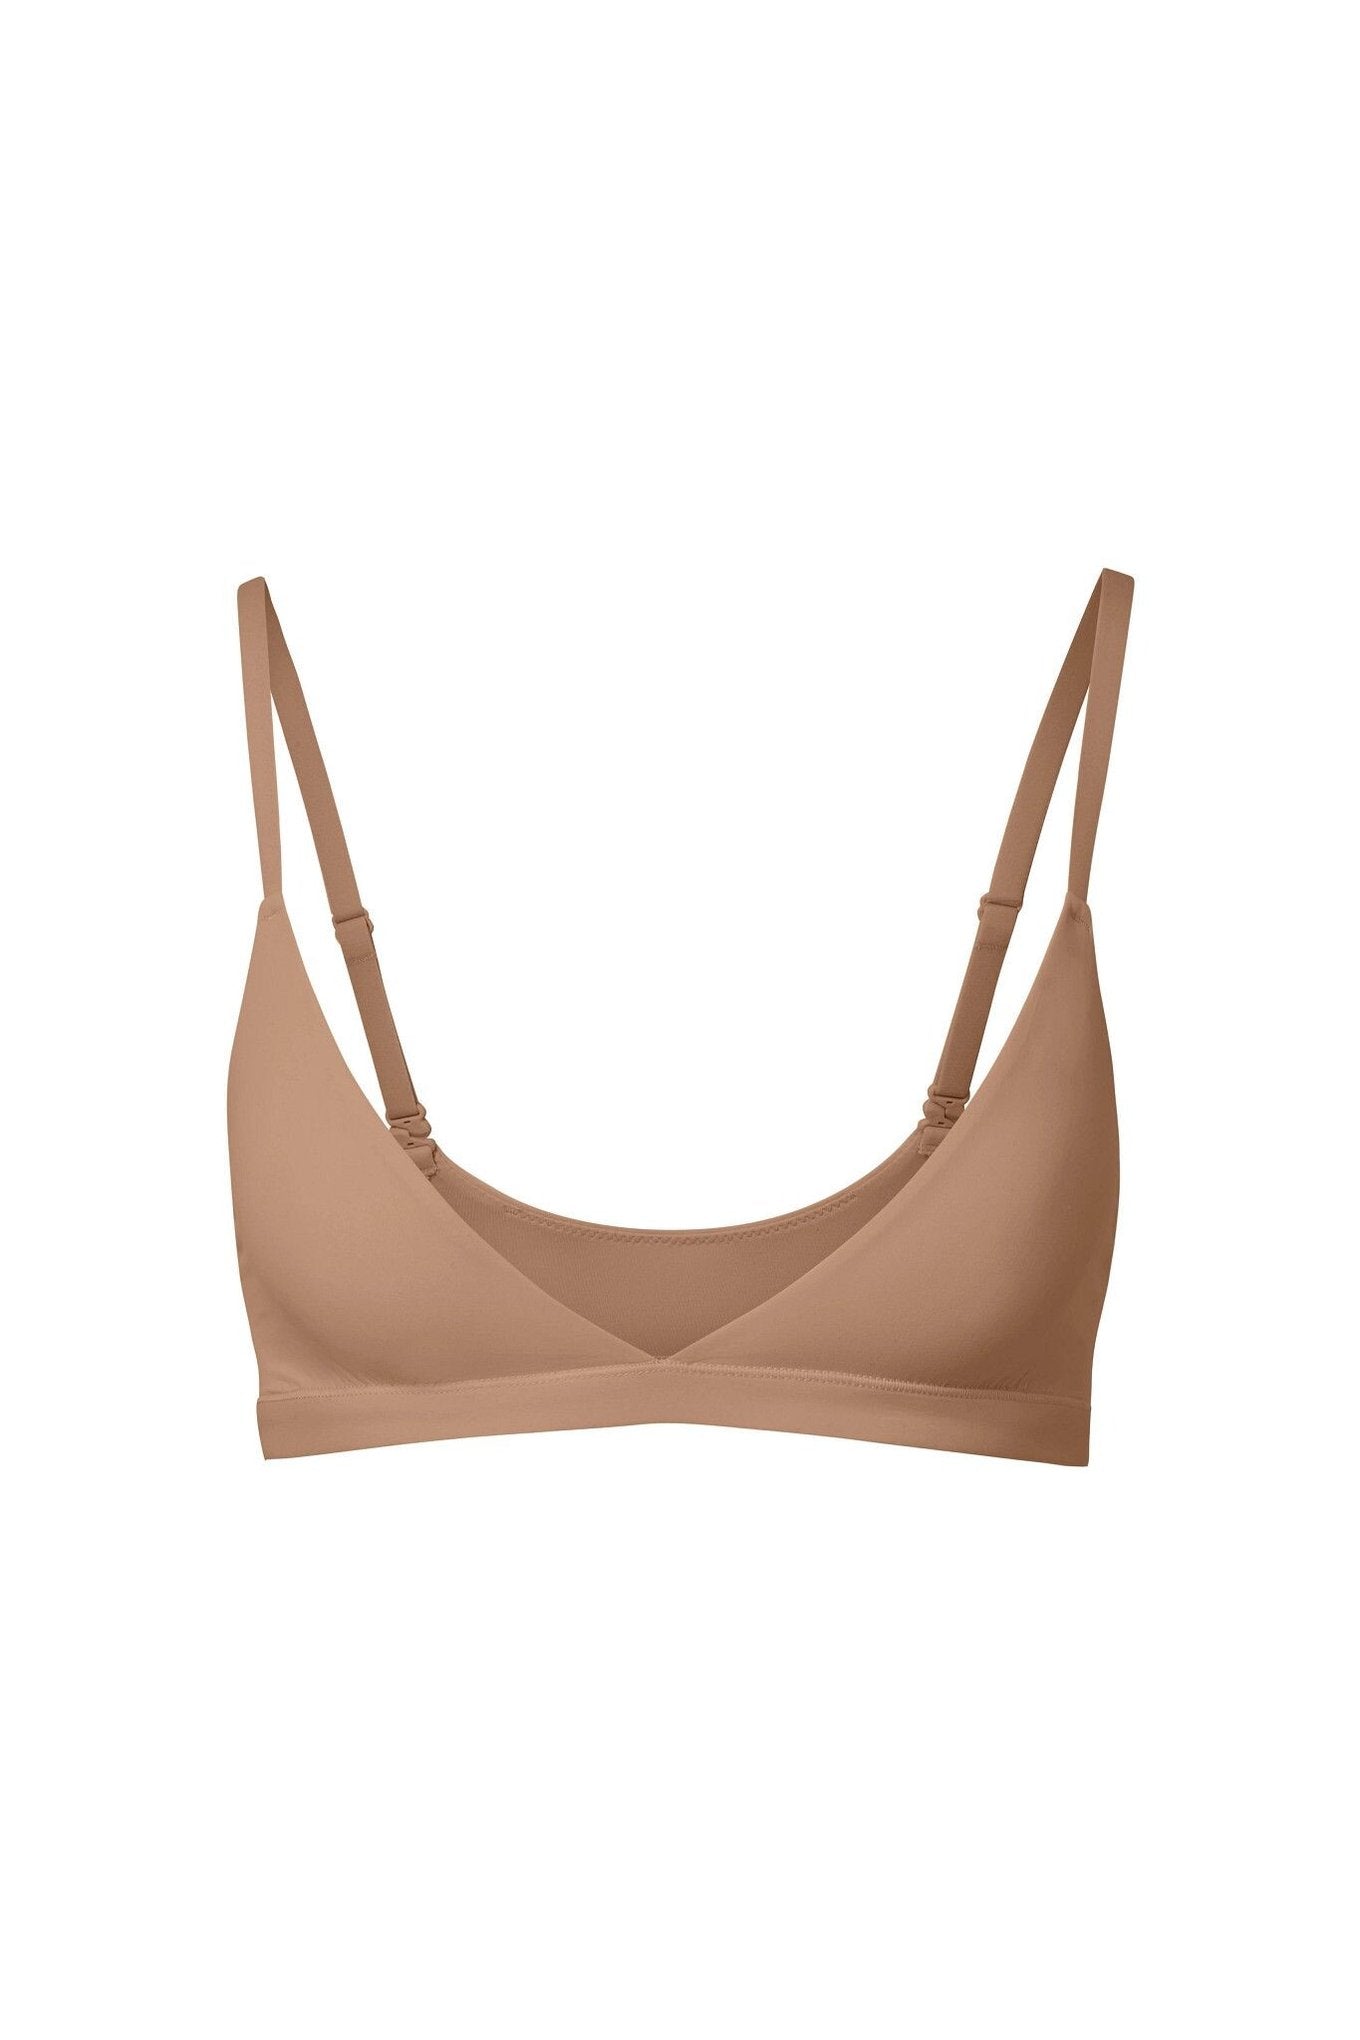 Buy NiteshEntP NON WIRED SANGINI BRA, SIZE 32C Cup - Pack Of 3